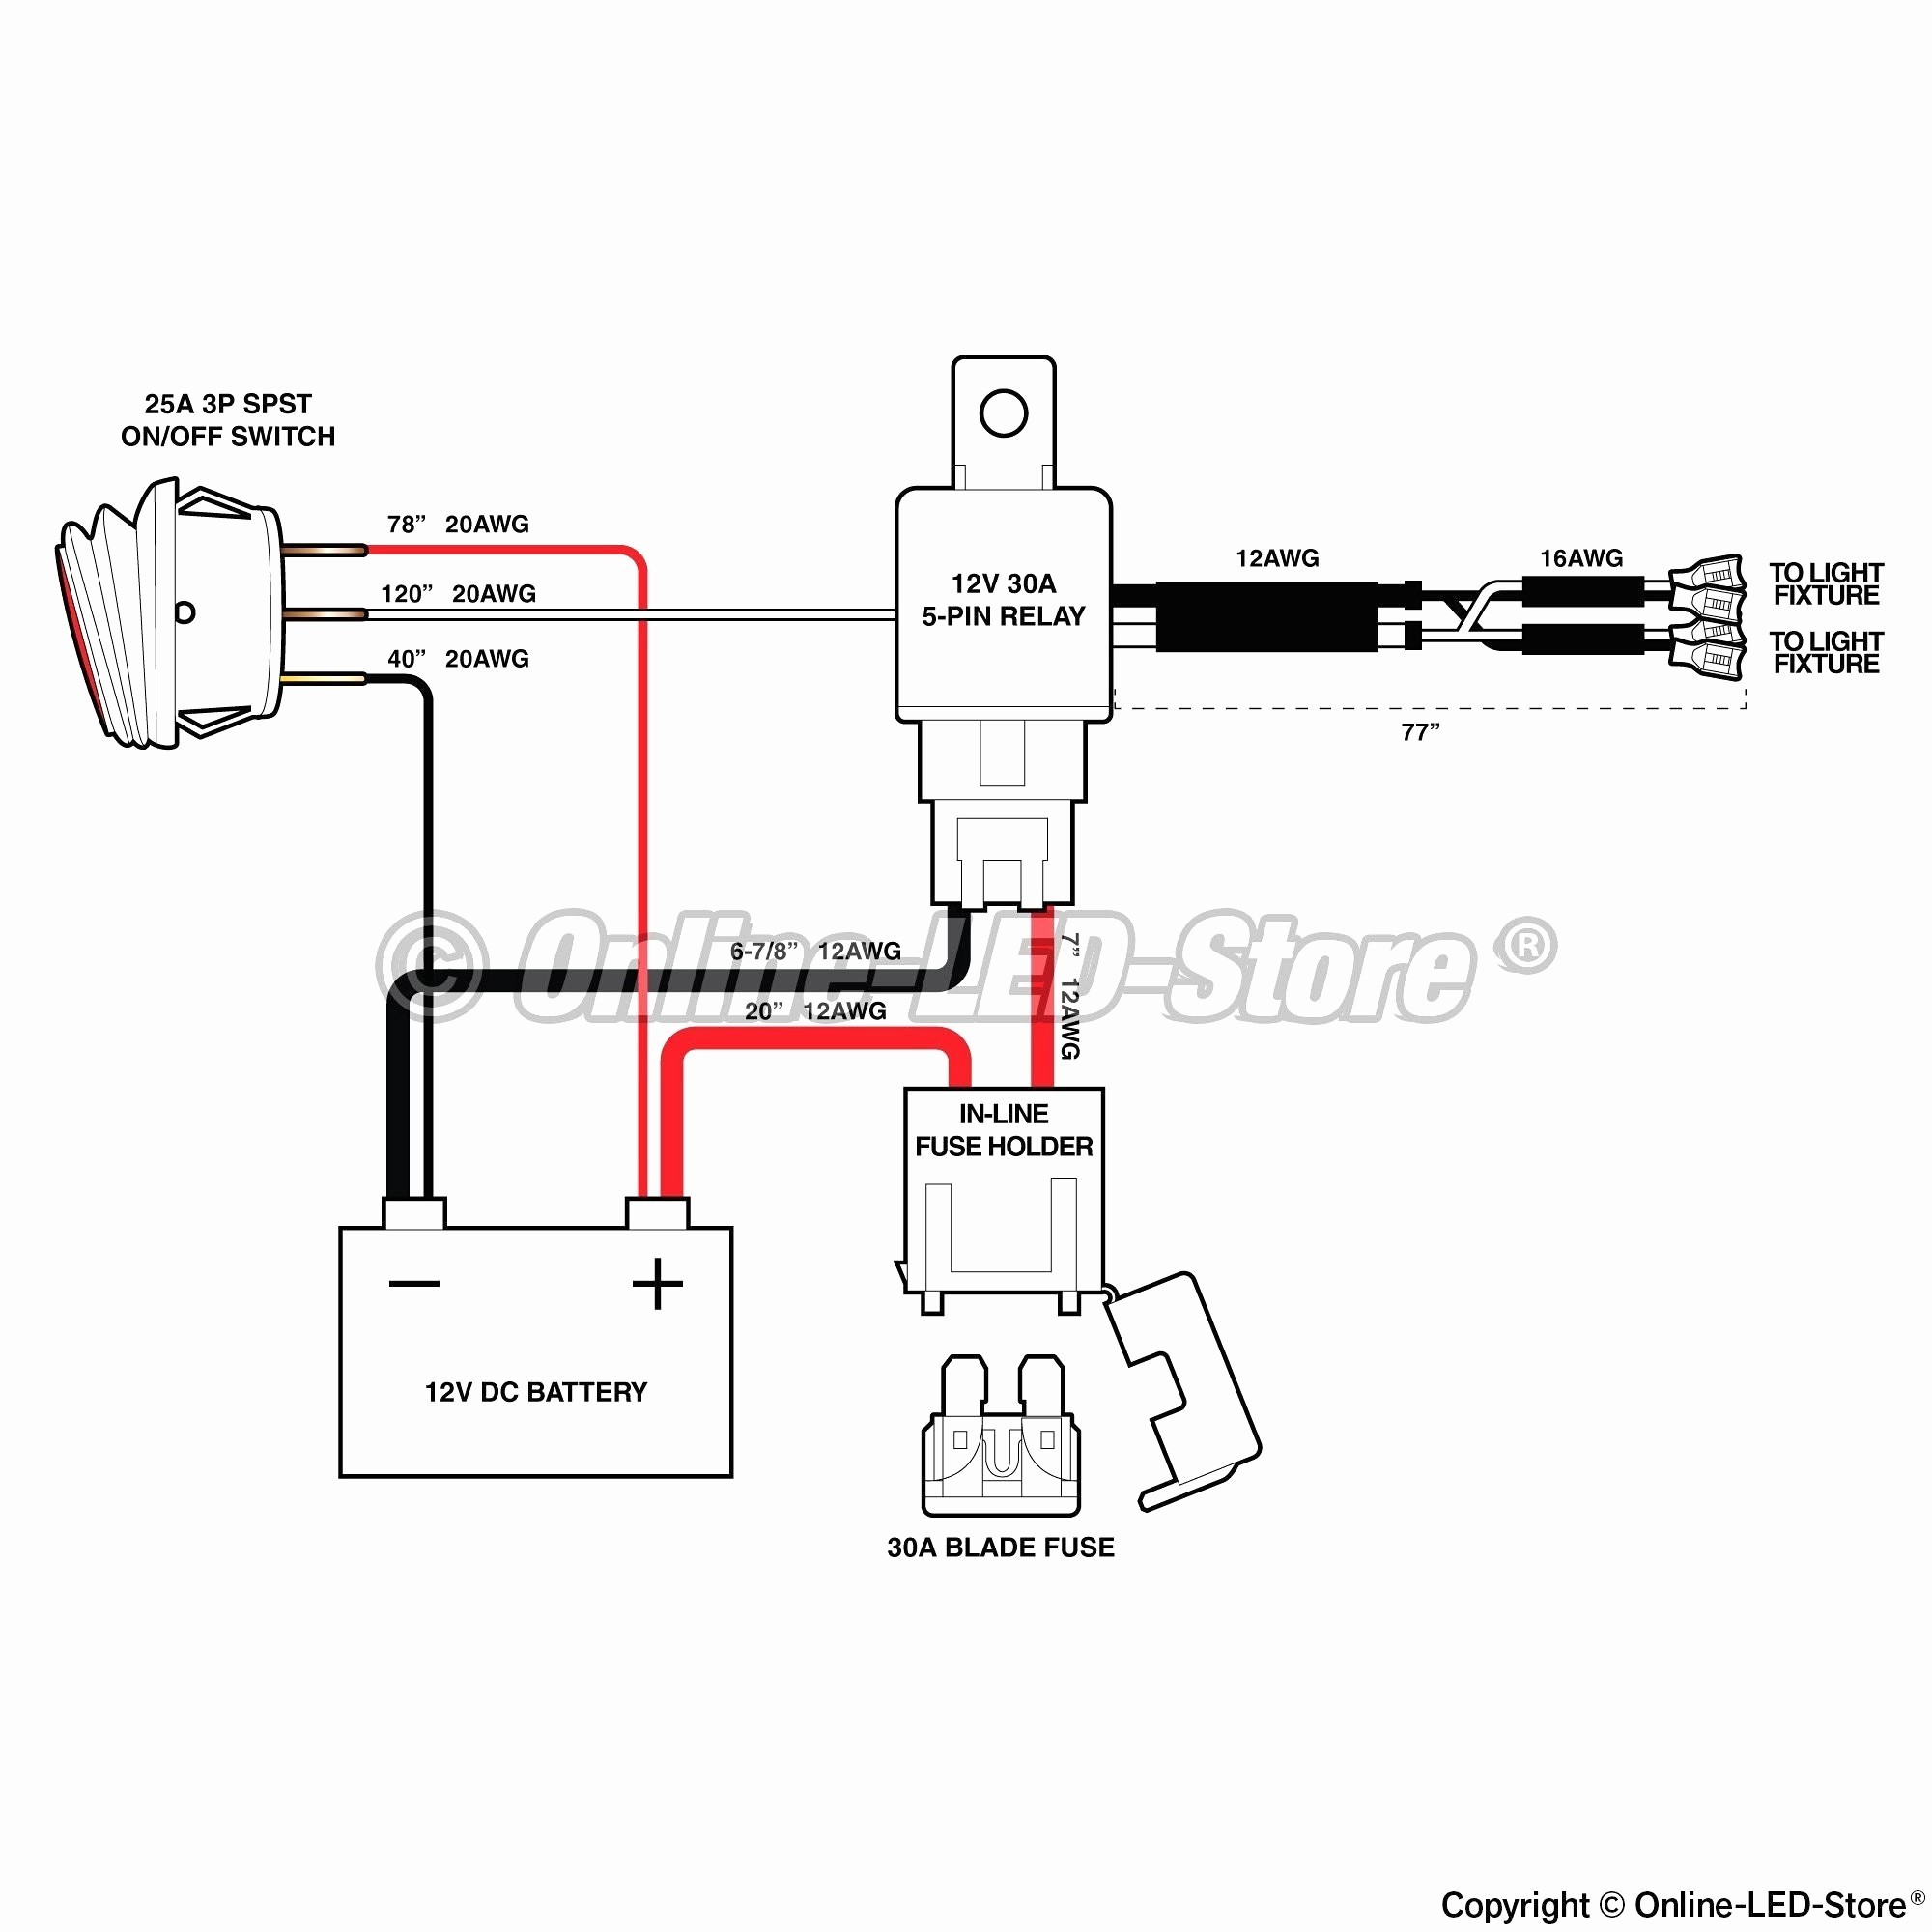 wiring diagram illuminated light switch fresh ignition switch relay rh joescablecar Single Pole Switch Wiring Diagram 4 Pin Switch Wiring Diagram